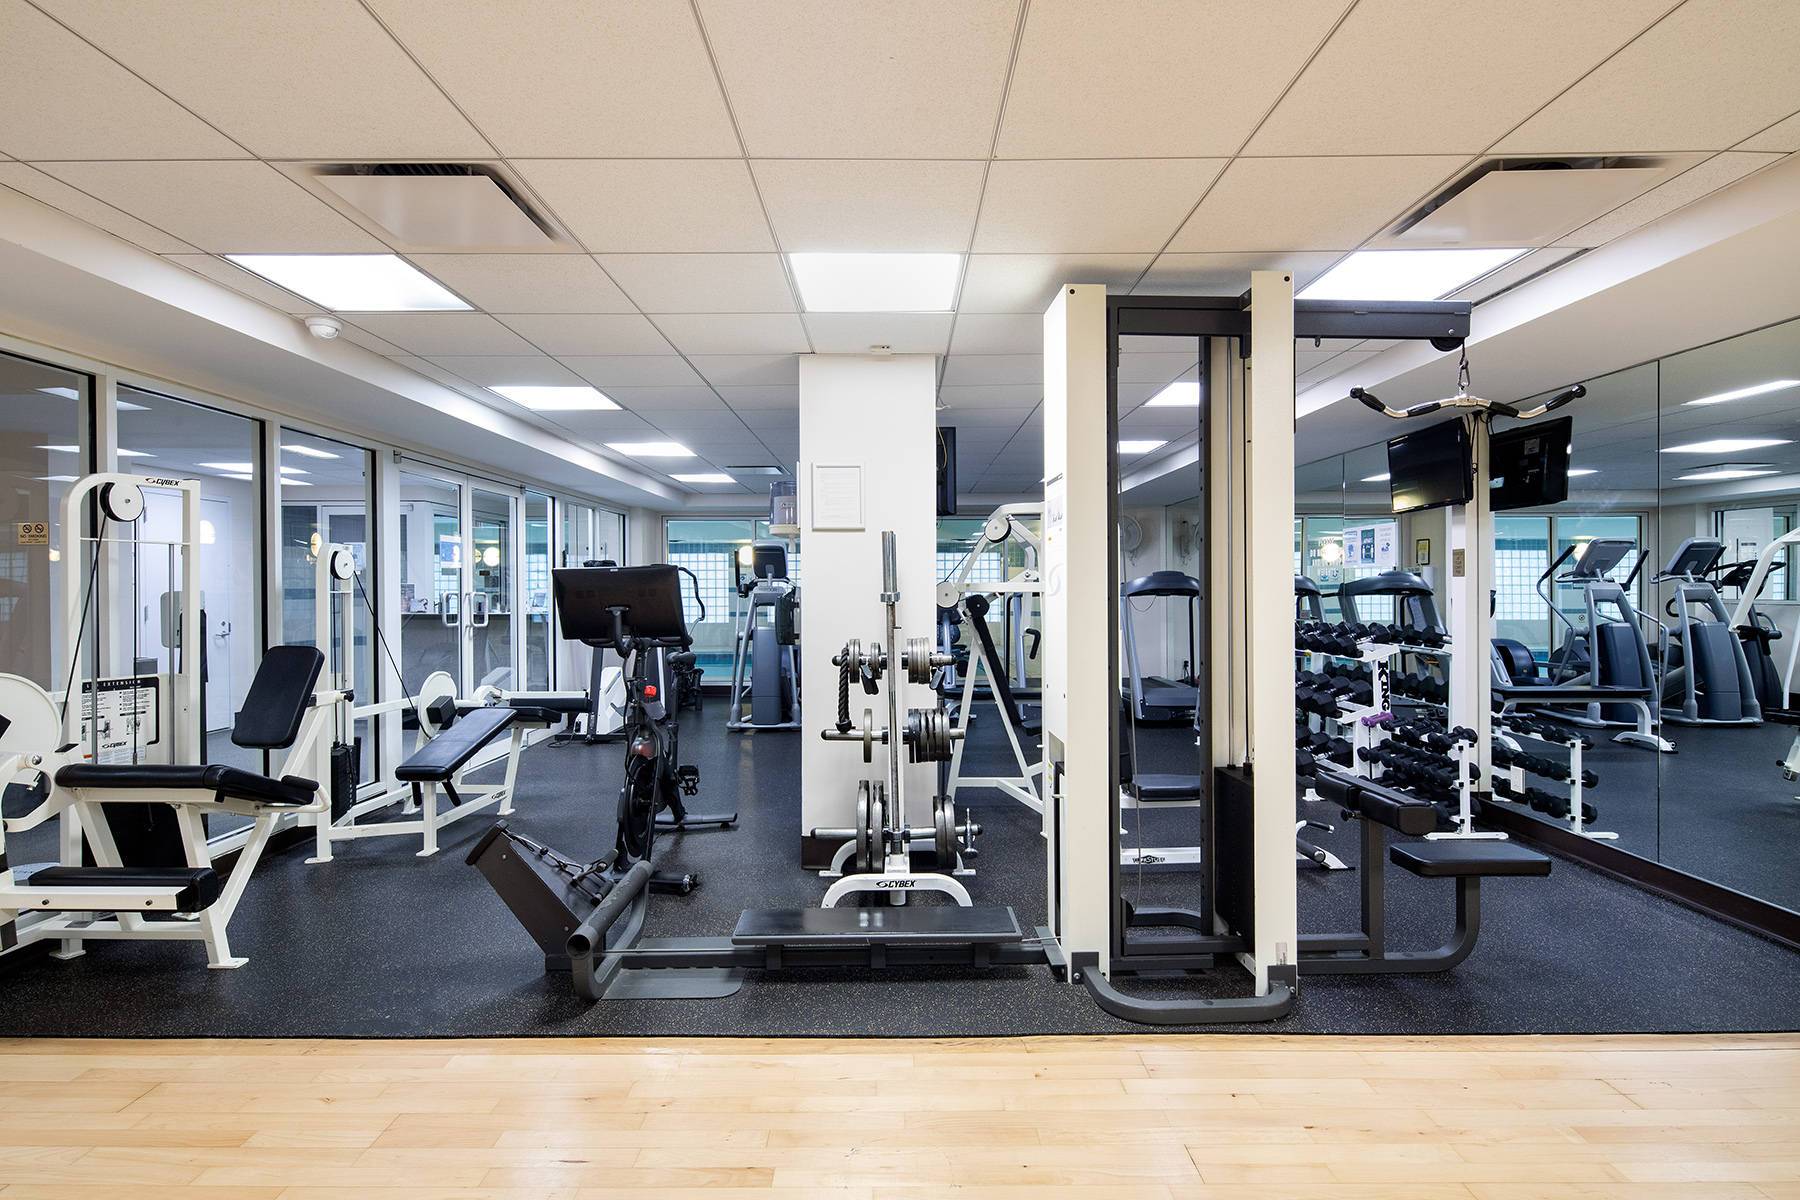 Bright fitness center with mirrored wall, weights and fitness equipment